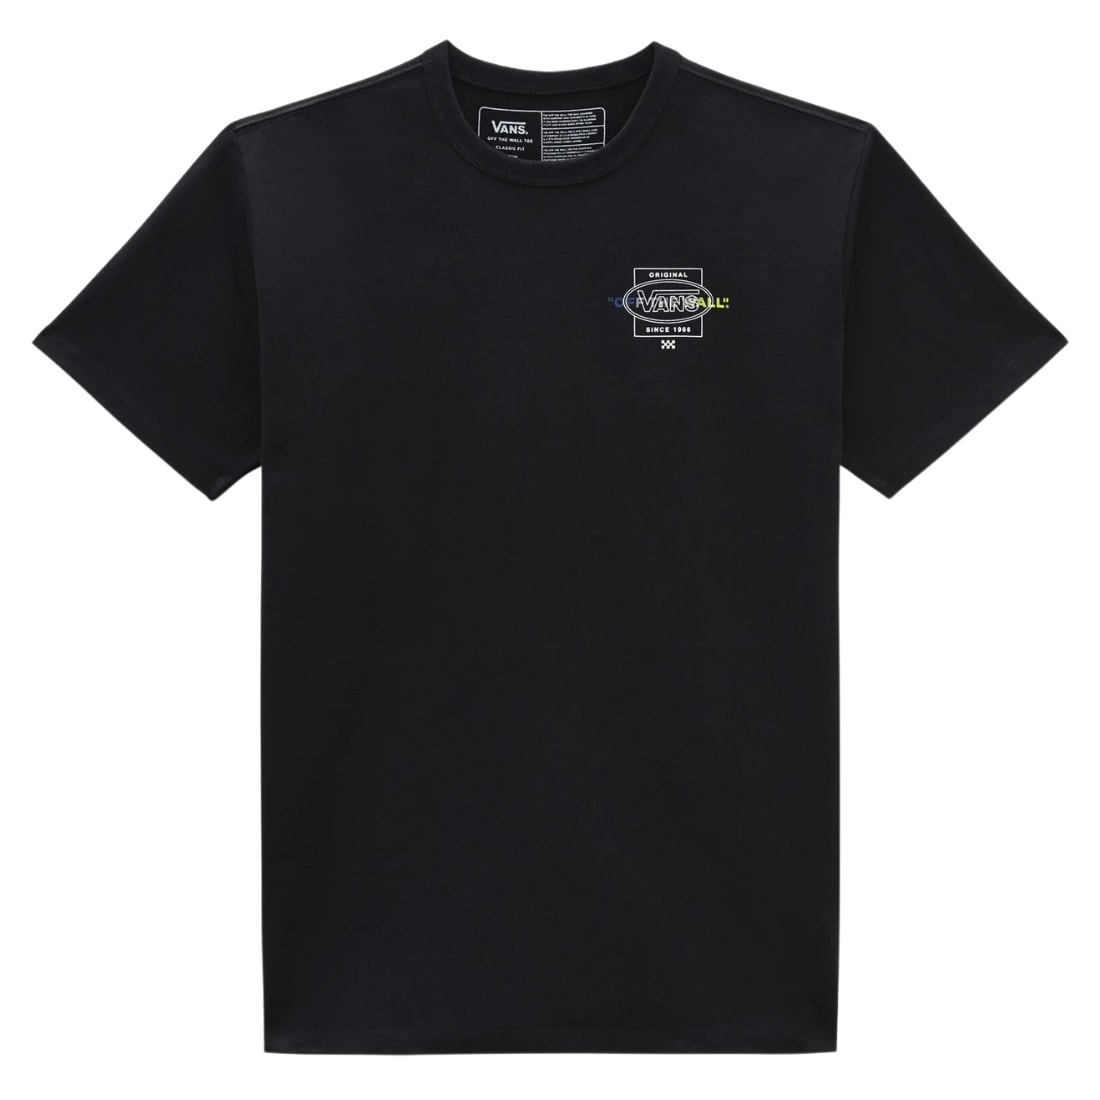 Vans Off The Wall Repeat Dna T-Shirt - Black - Mens Graphic T-Shirt by Vans